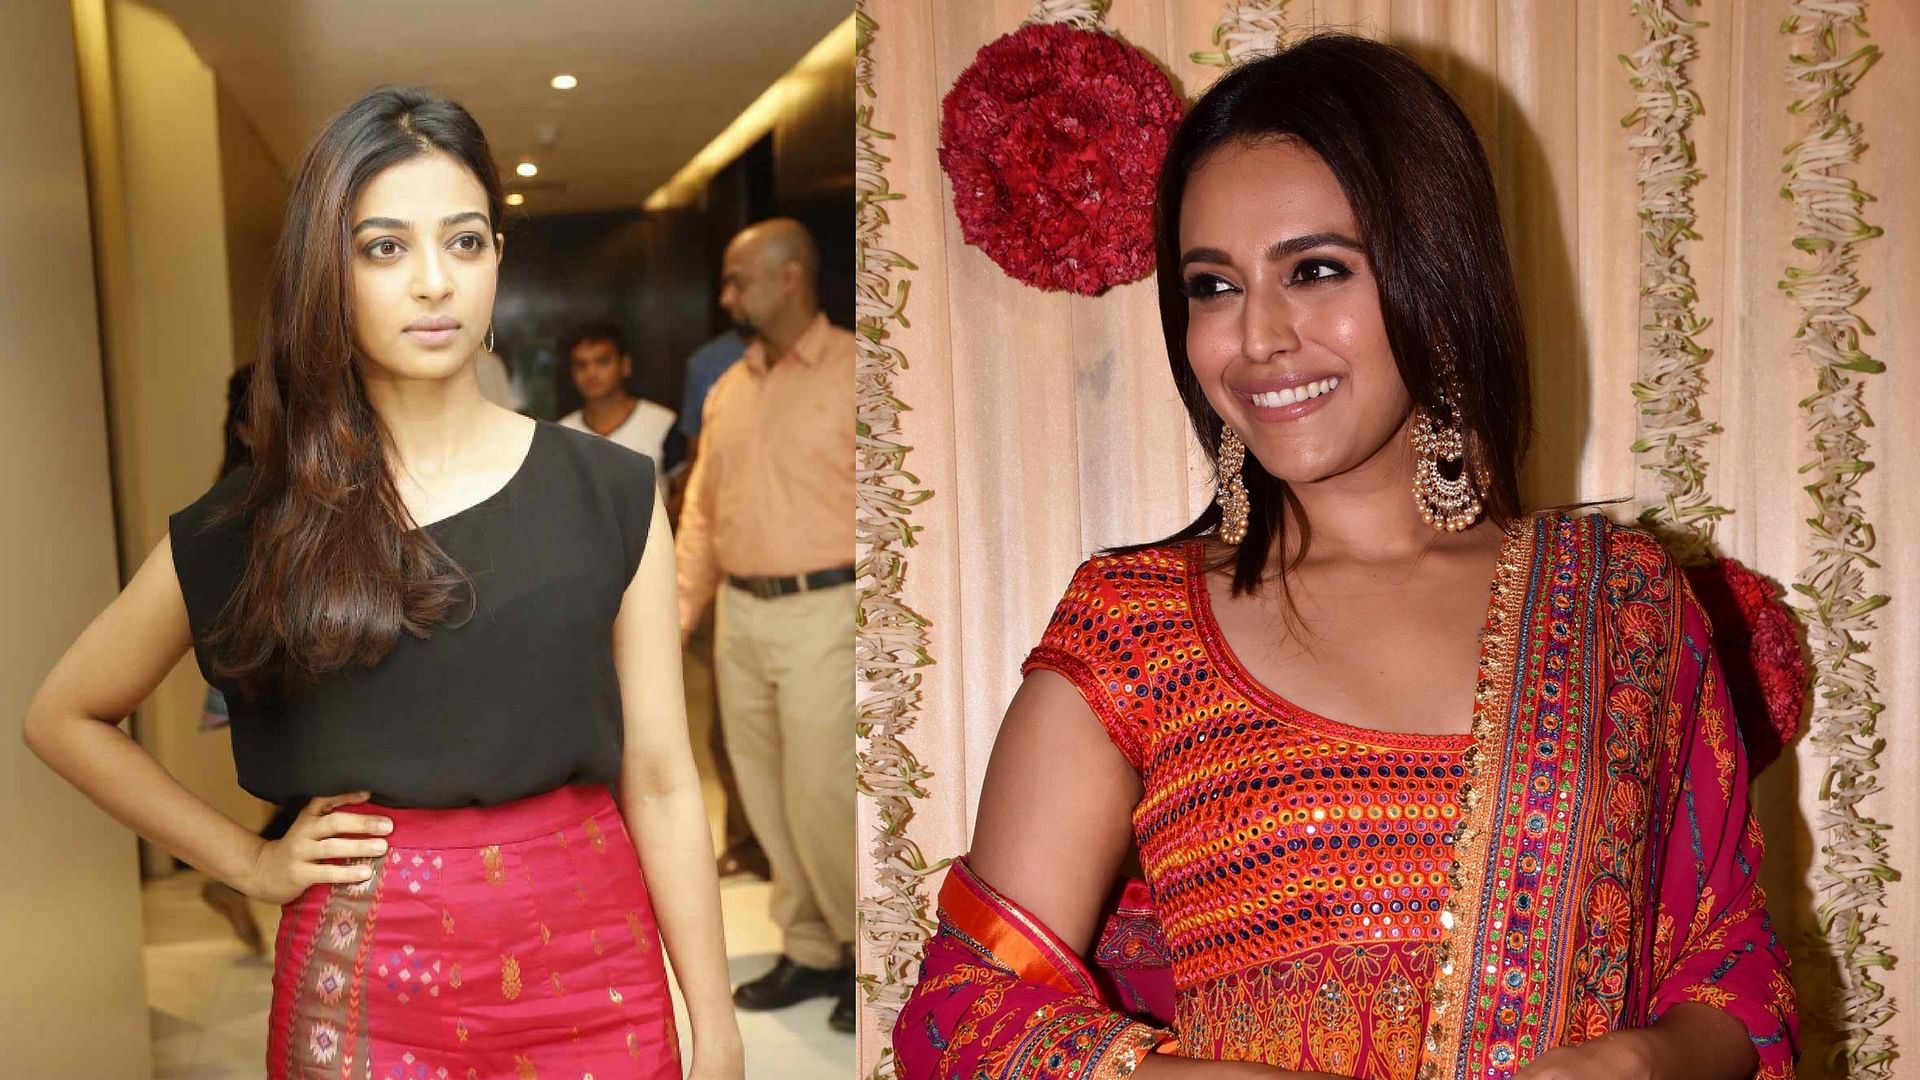 Radhika Apte and Swara Bhasker handle being propositioned for roles in Bollywood in their own different ways.